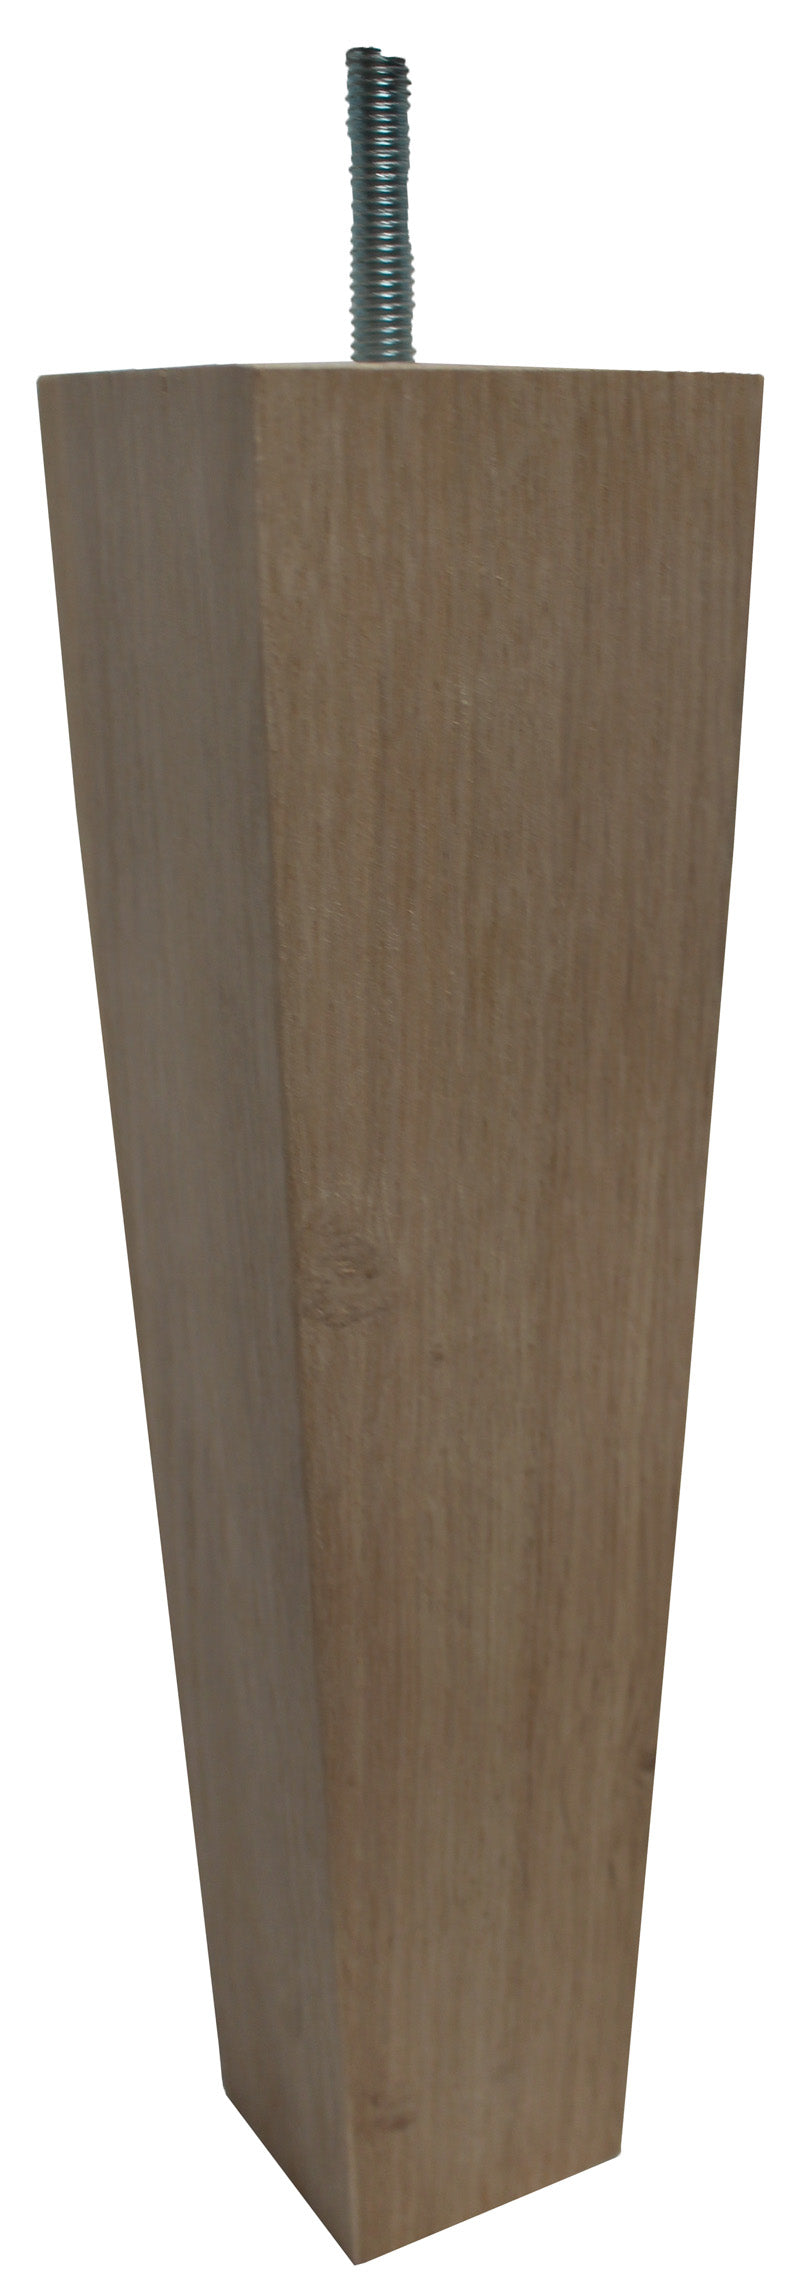 Valentina Solid Oak Square Tapered Wooden Furniture Legs - Raw Finish - Set of 4